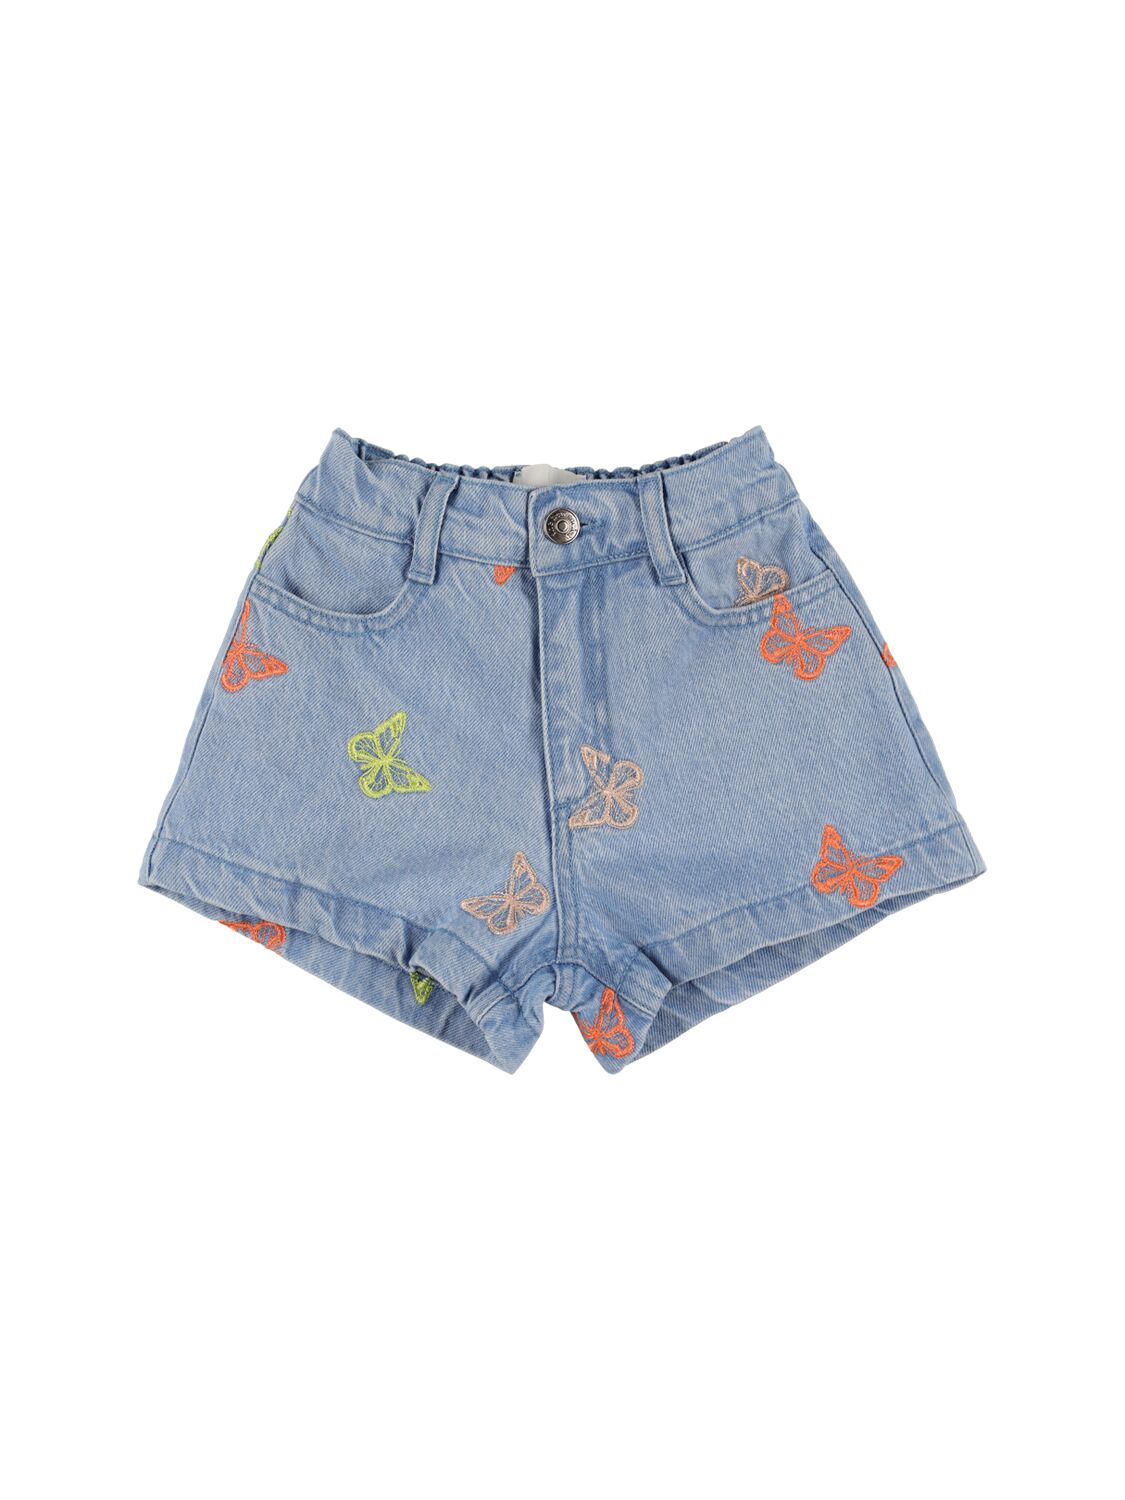 The New Society Kids' Embroidered Cotton Chambray Shorts In Denim,multi